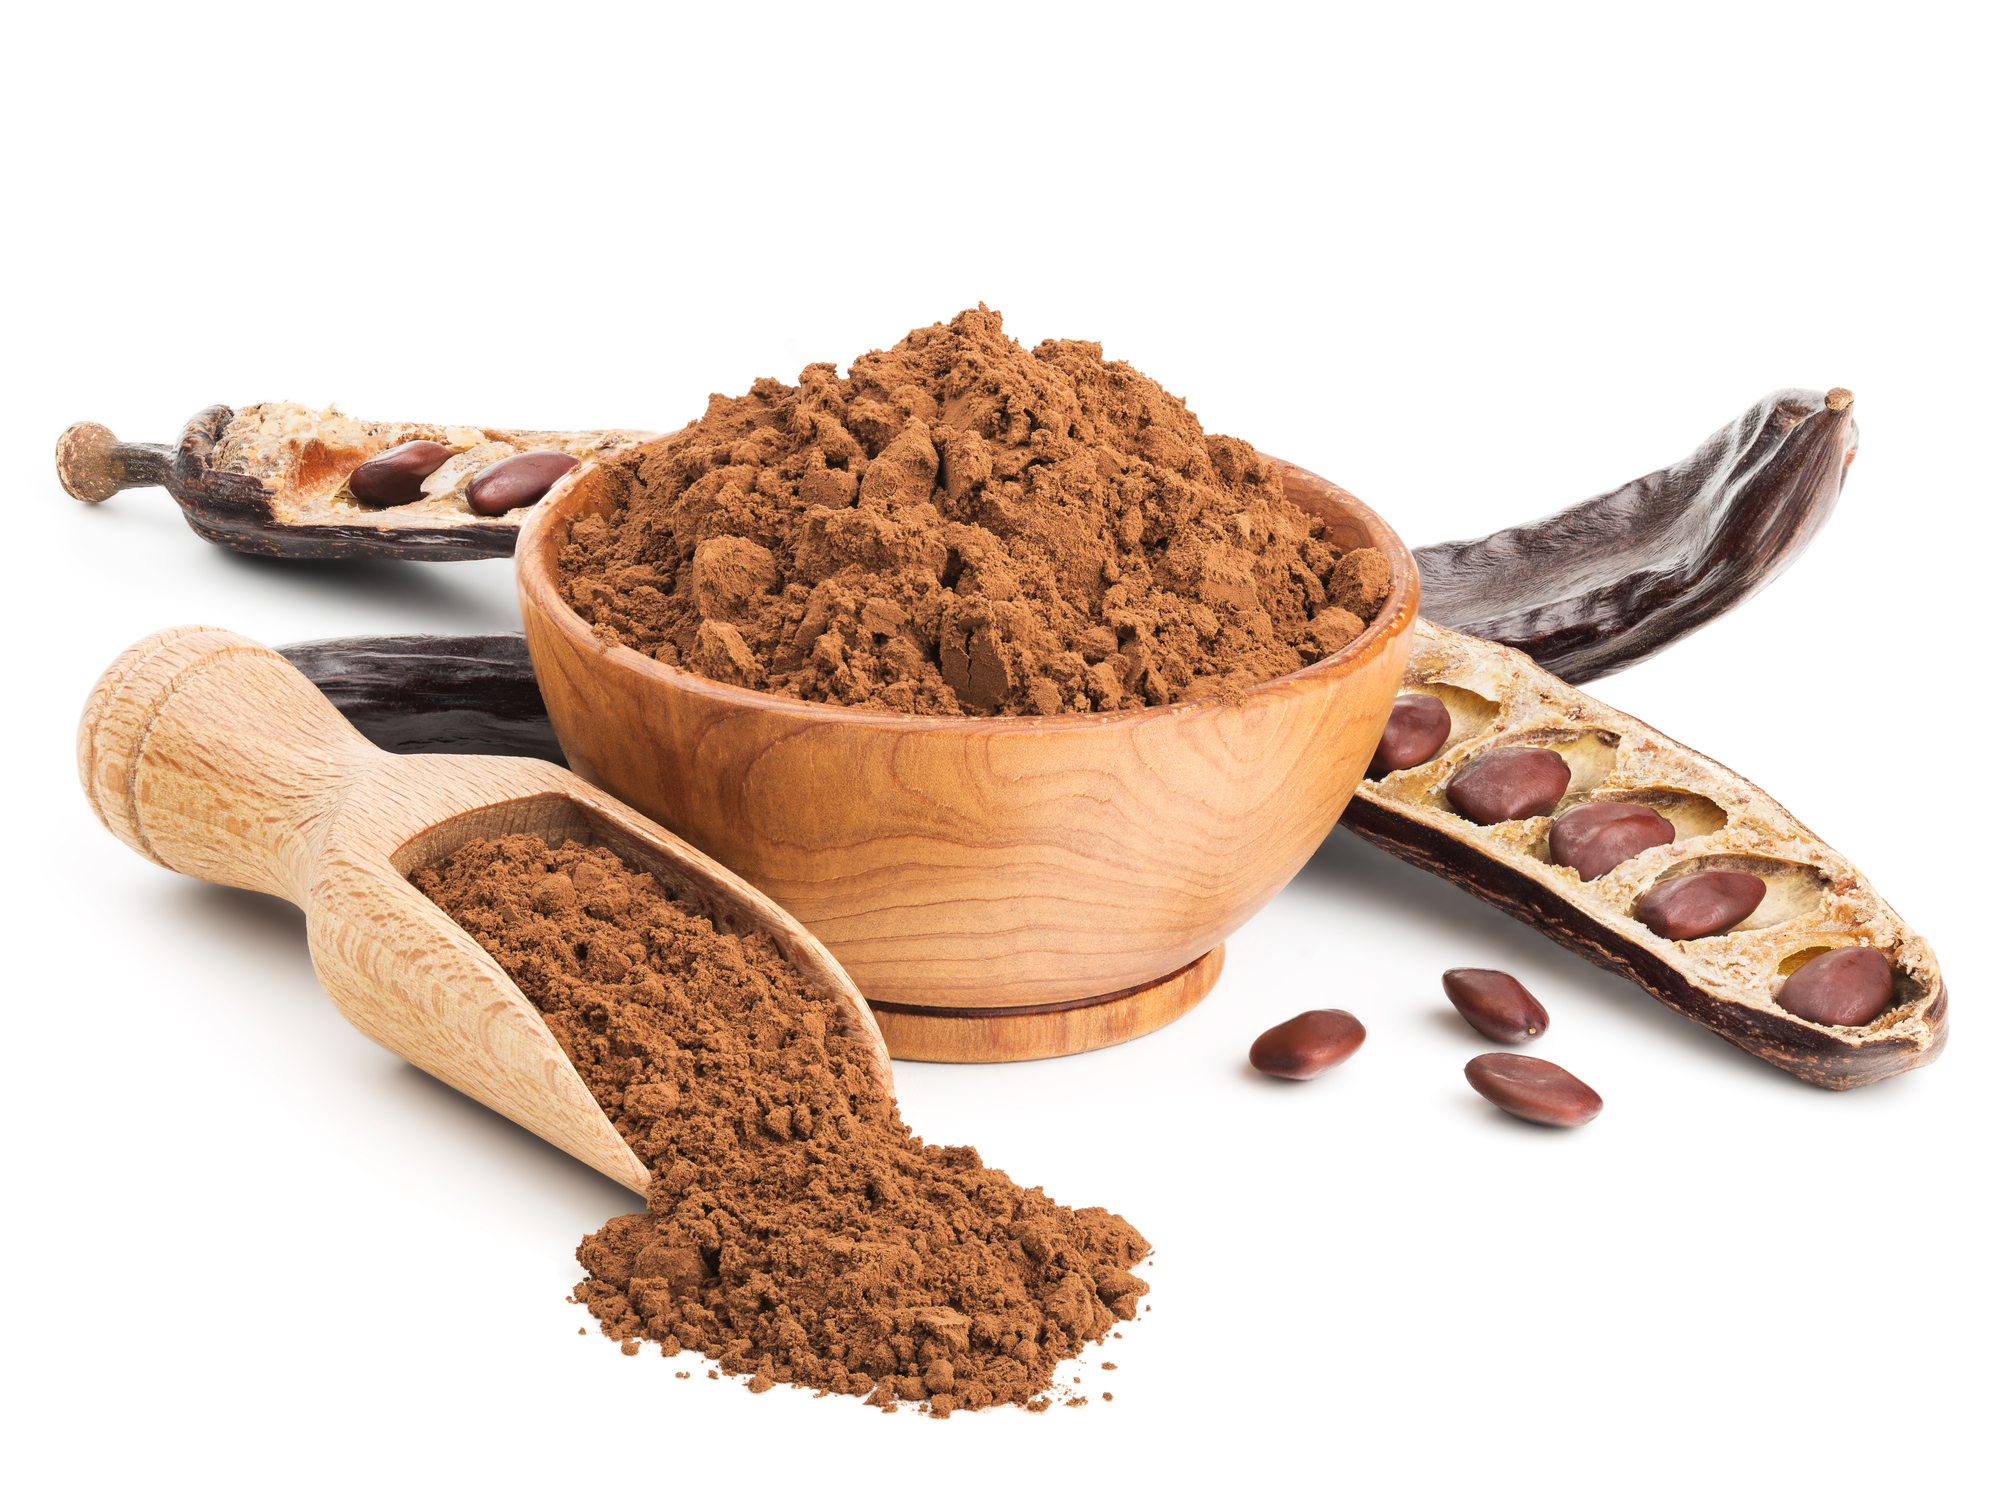 Carob powder may replace cocoa for phytosterol-rich muffins